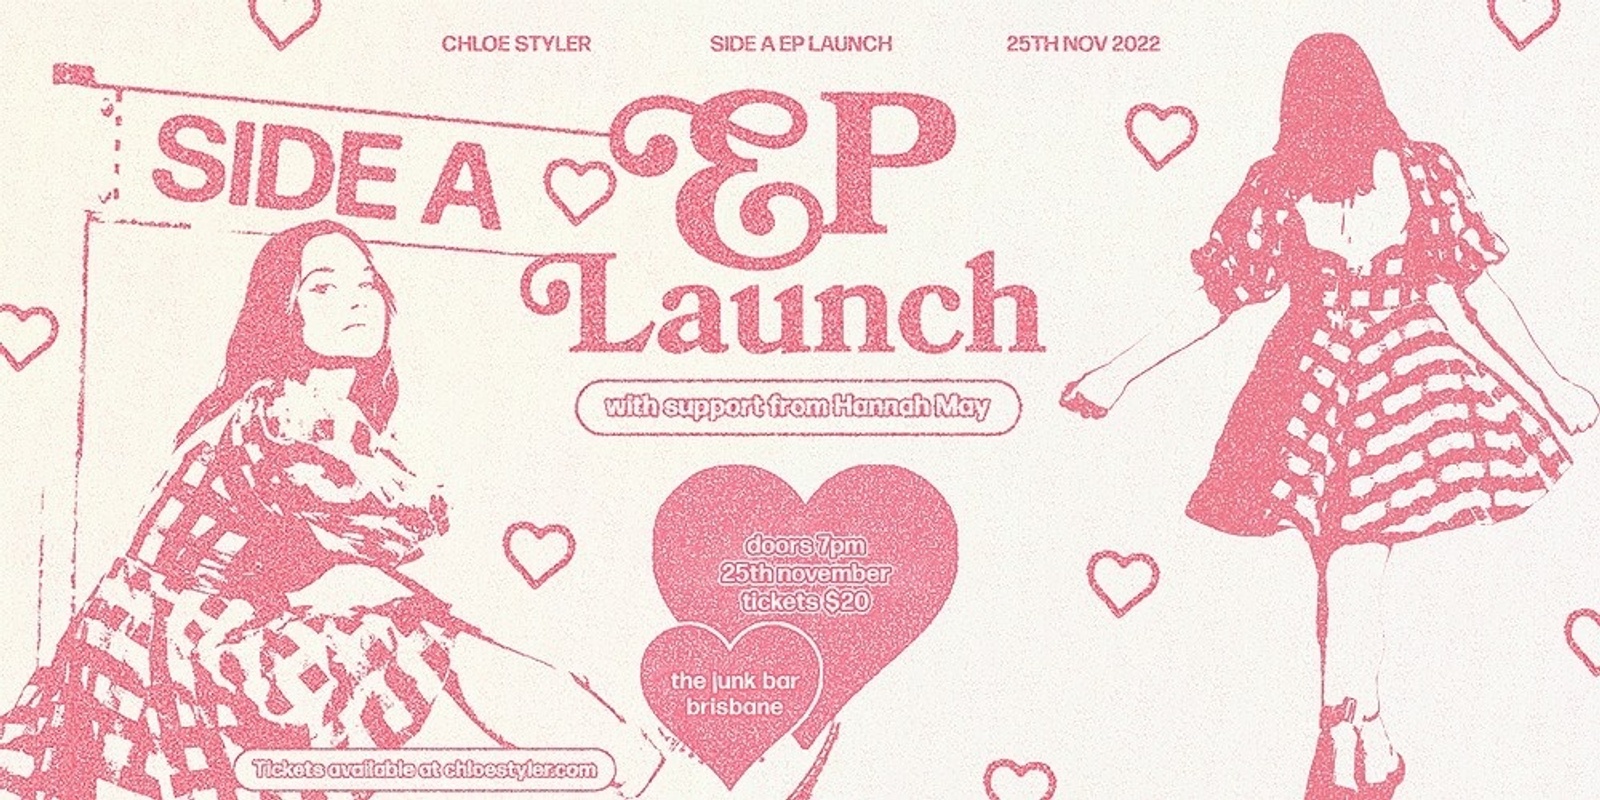 Banner image for Chloe Styler "Side A" EP Launch